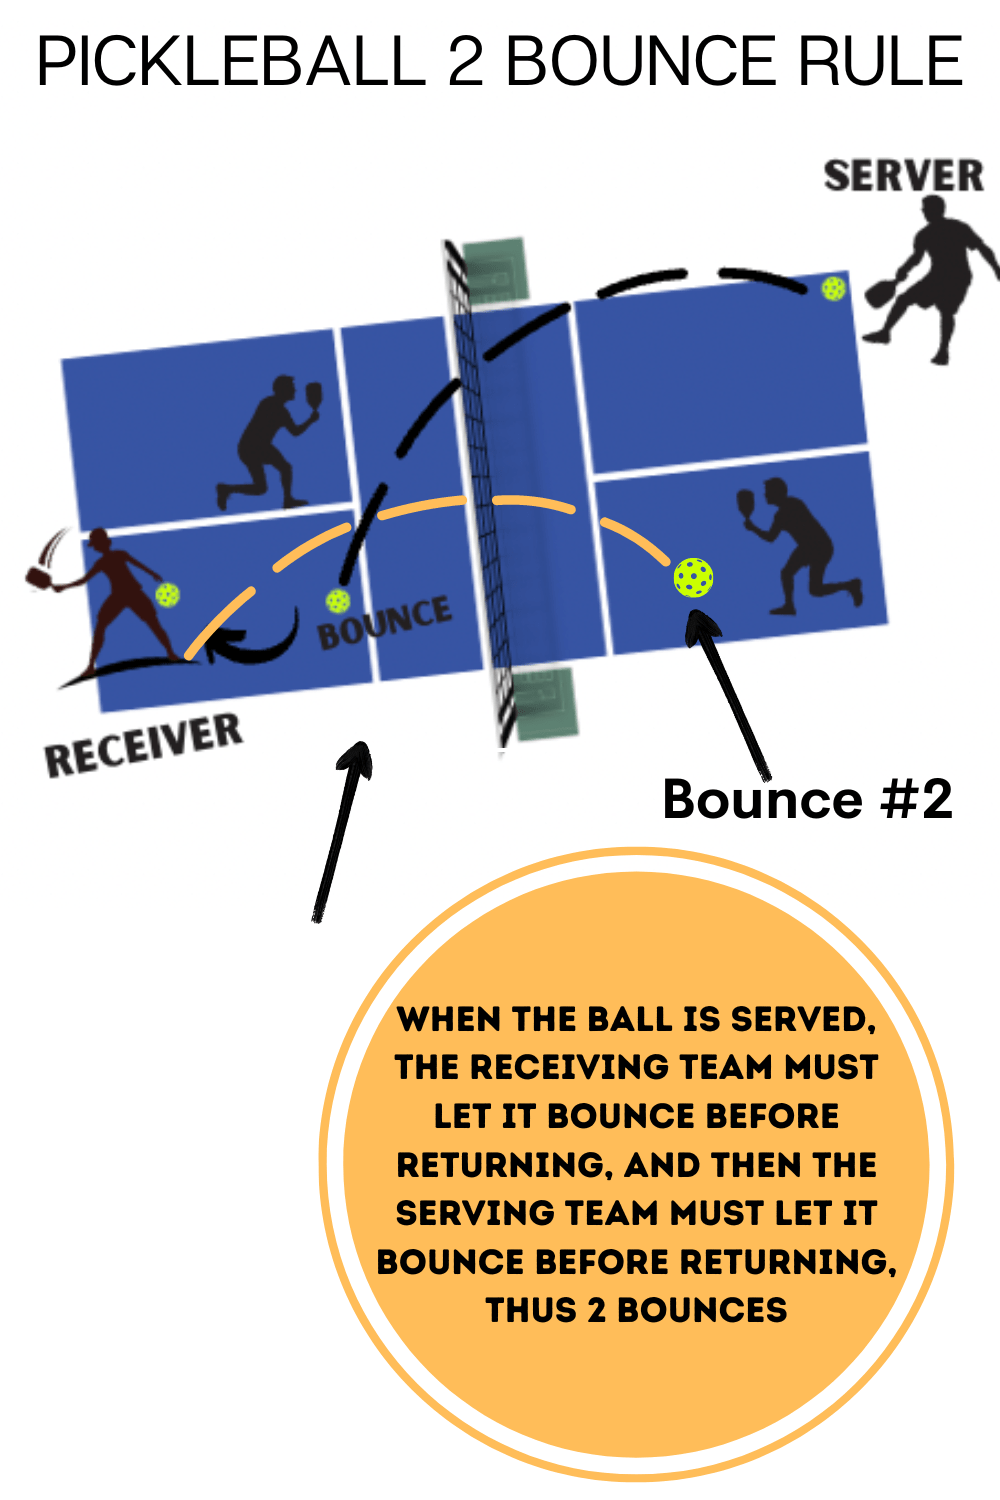 description and diagram of the 2 bounce rule in pickleball